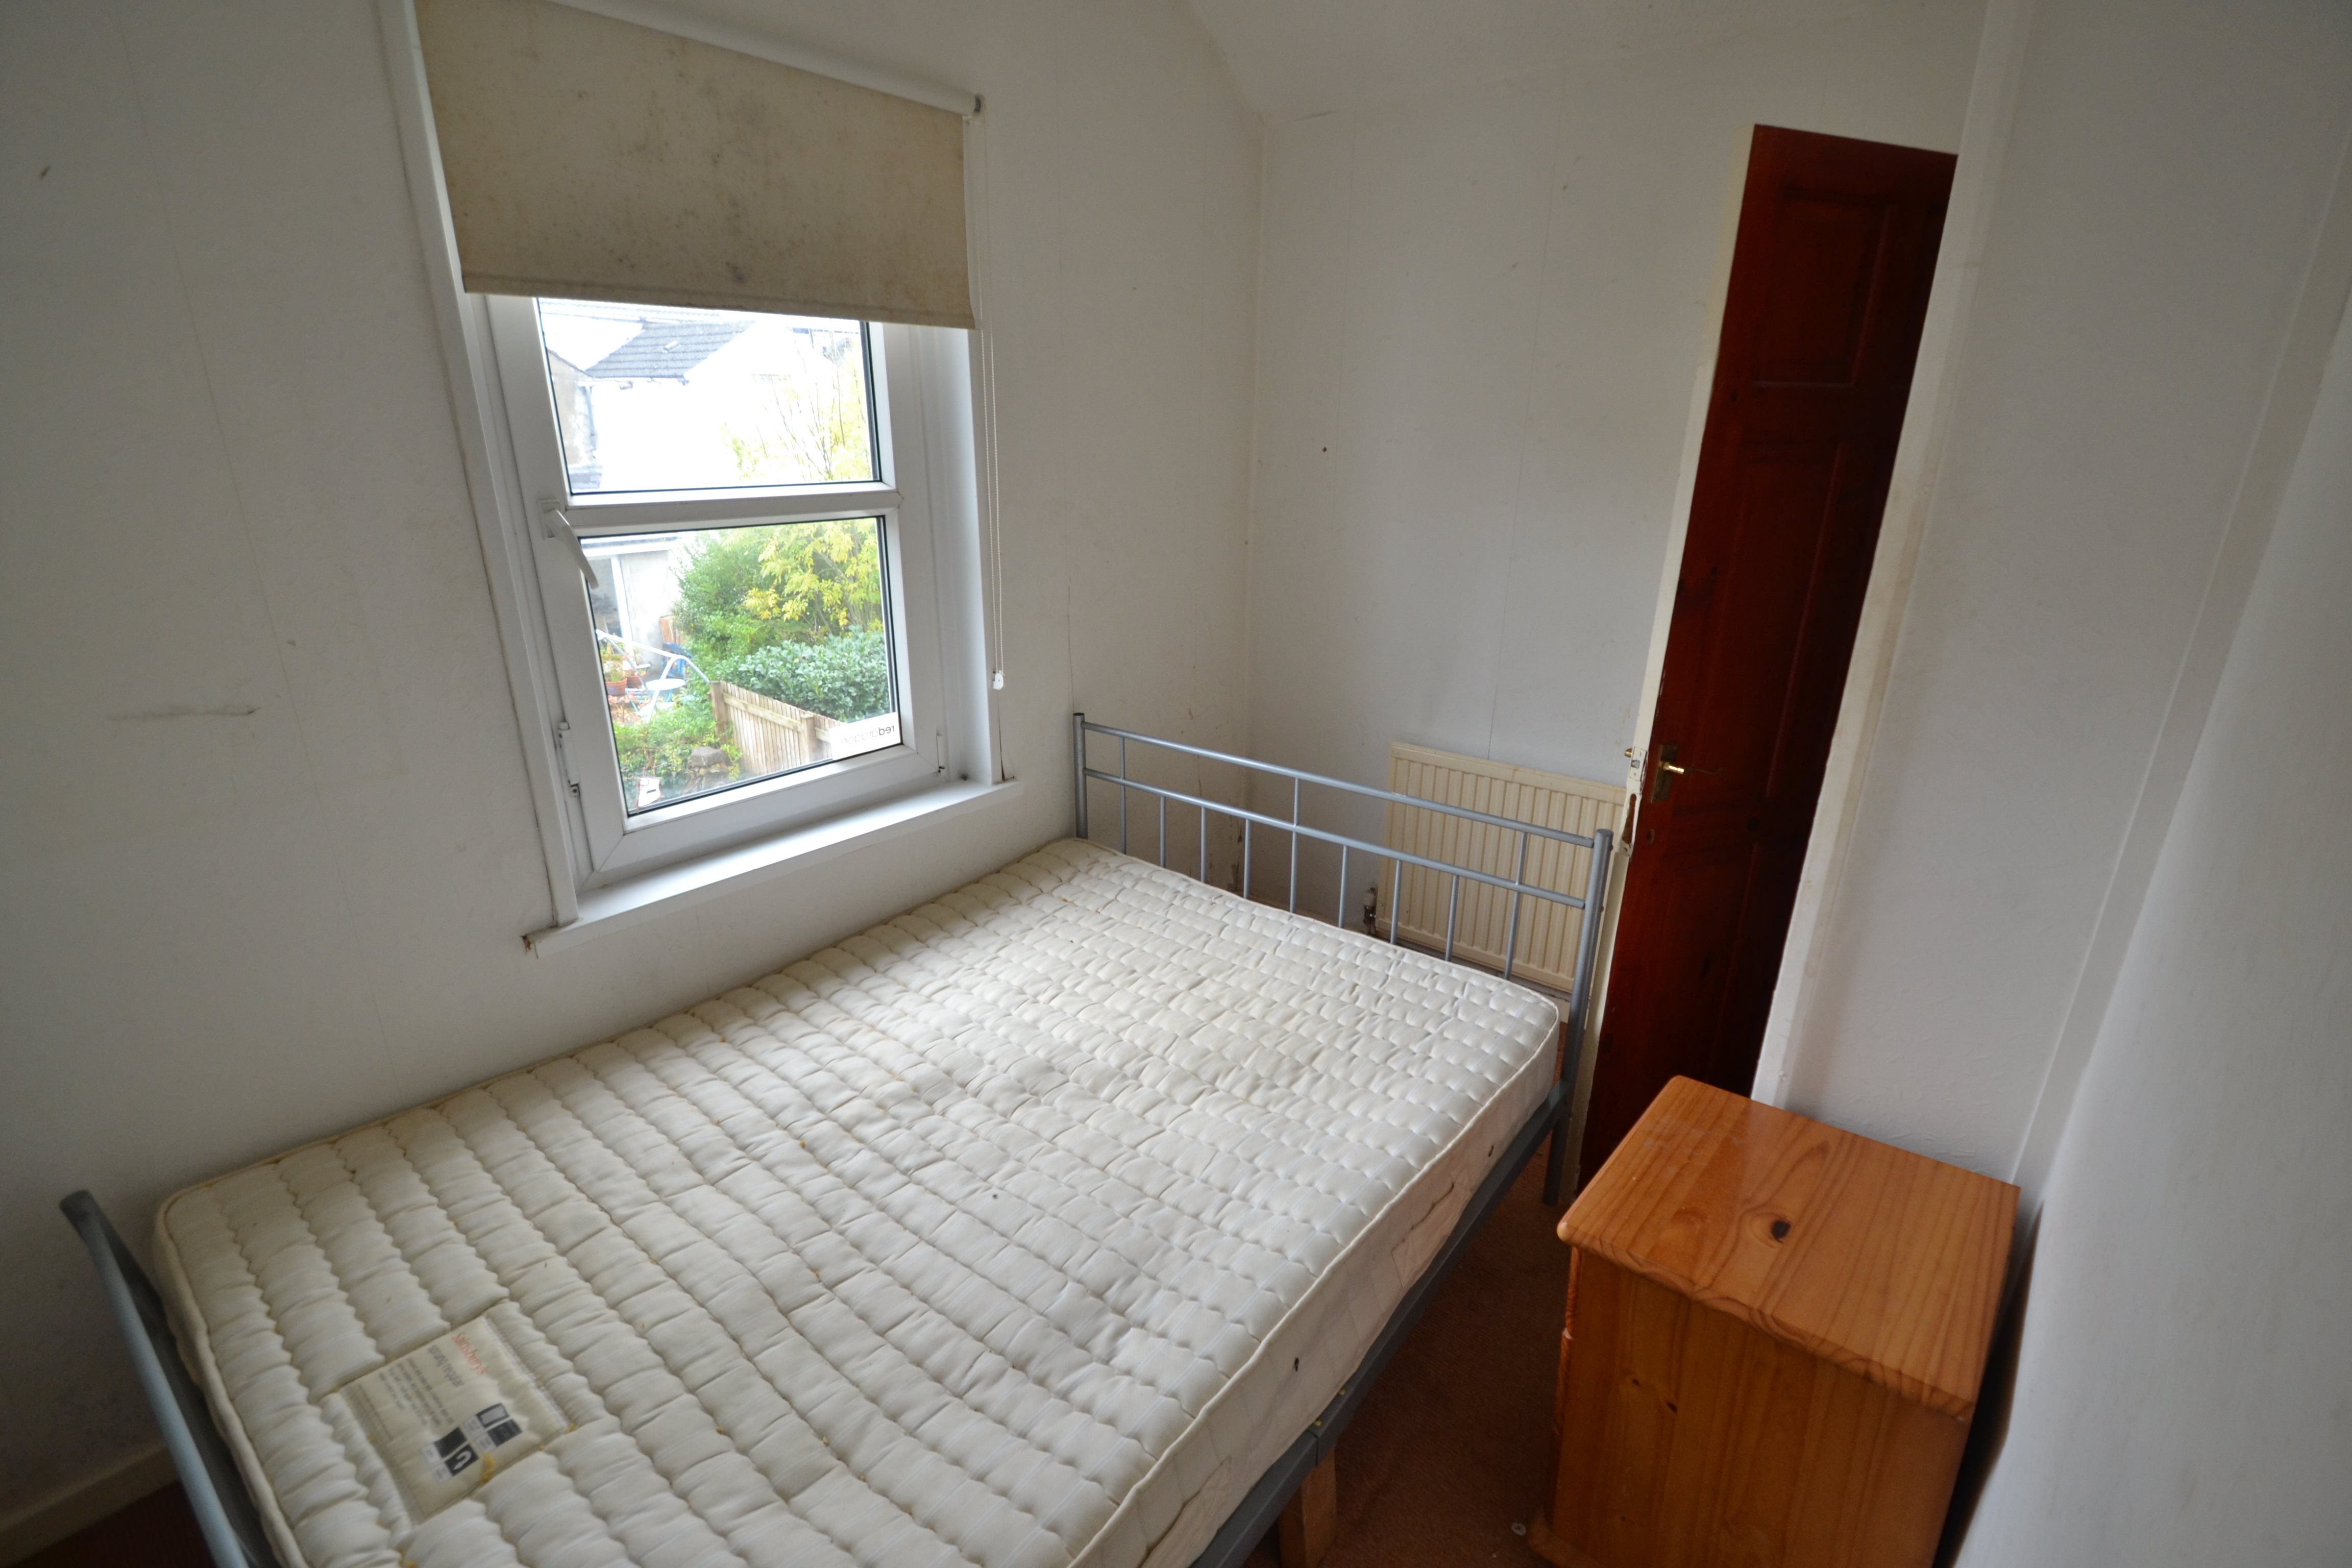 1 bed house / flat share to rent in Rawden Place, City Centre  - Property Image 1